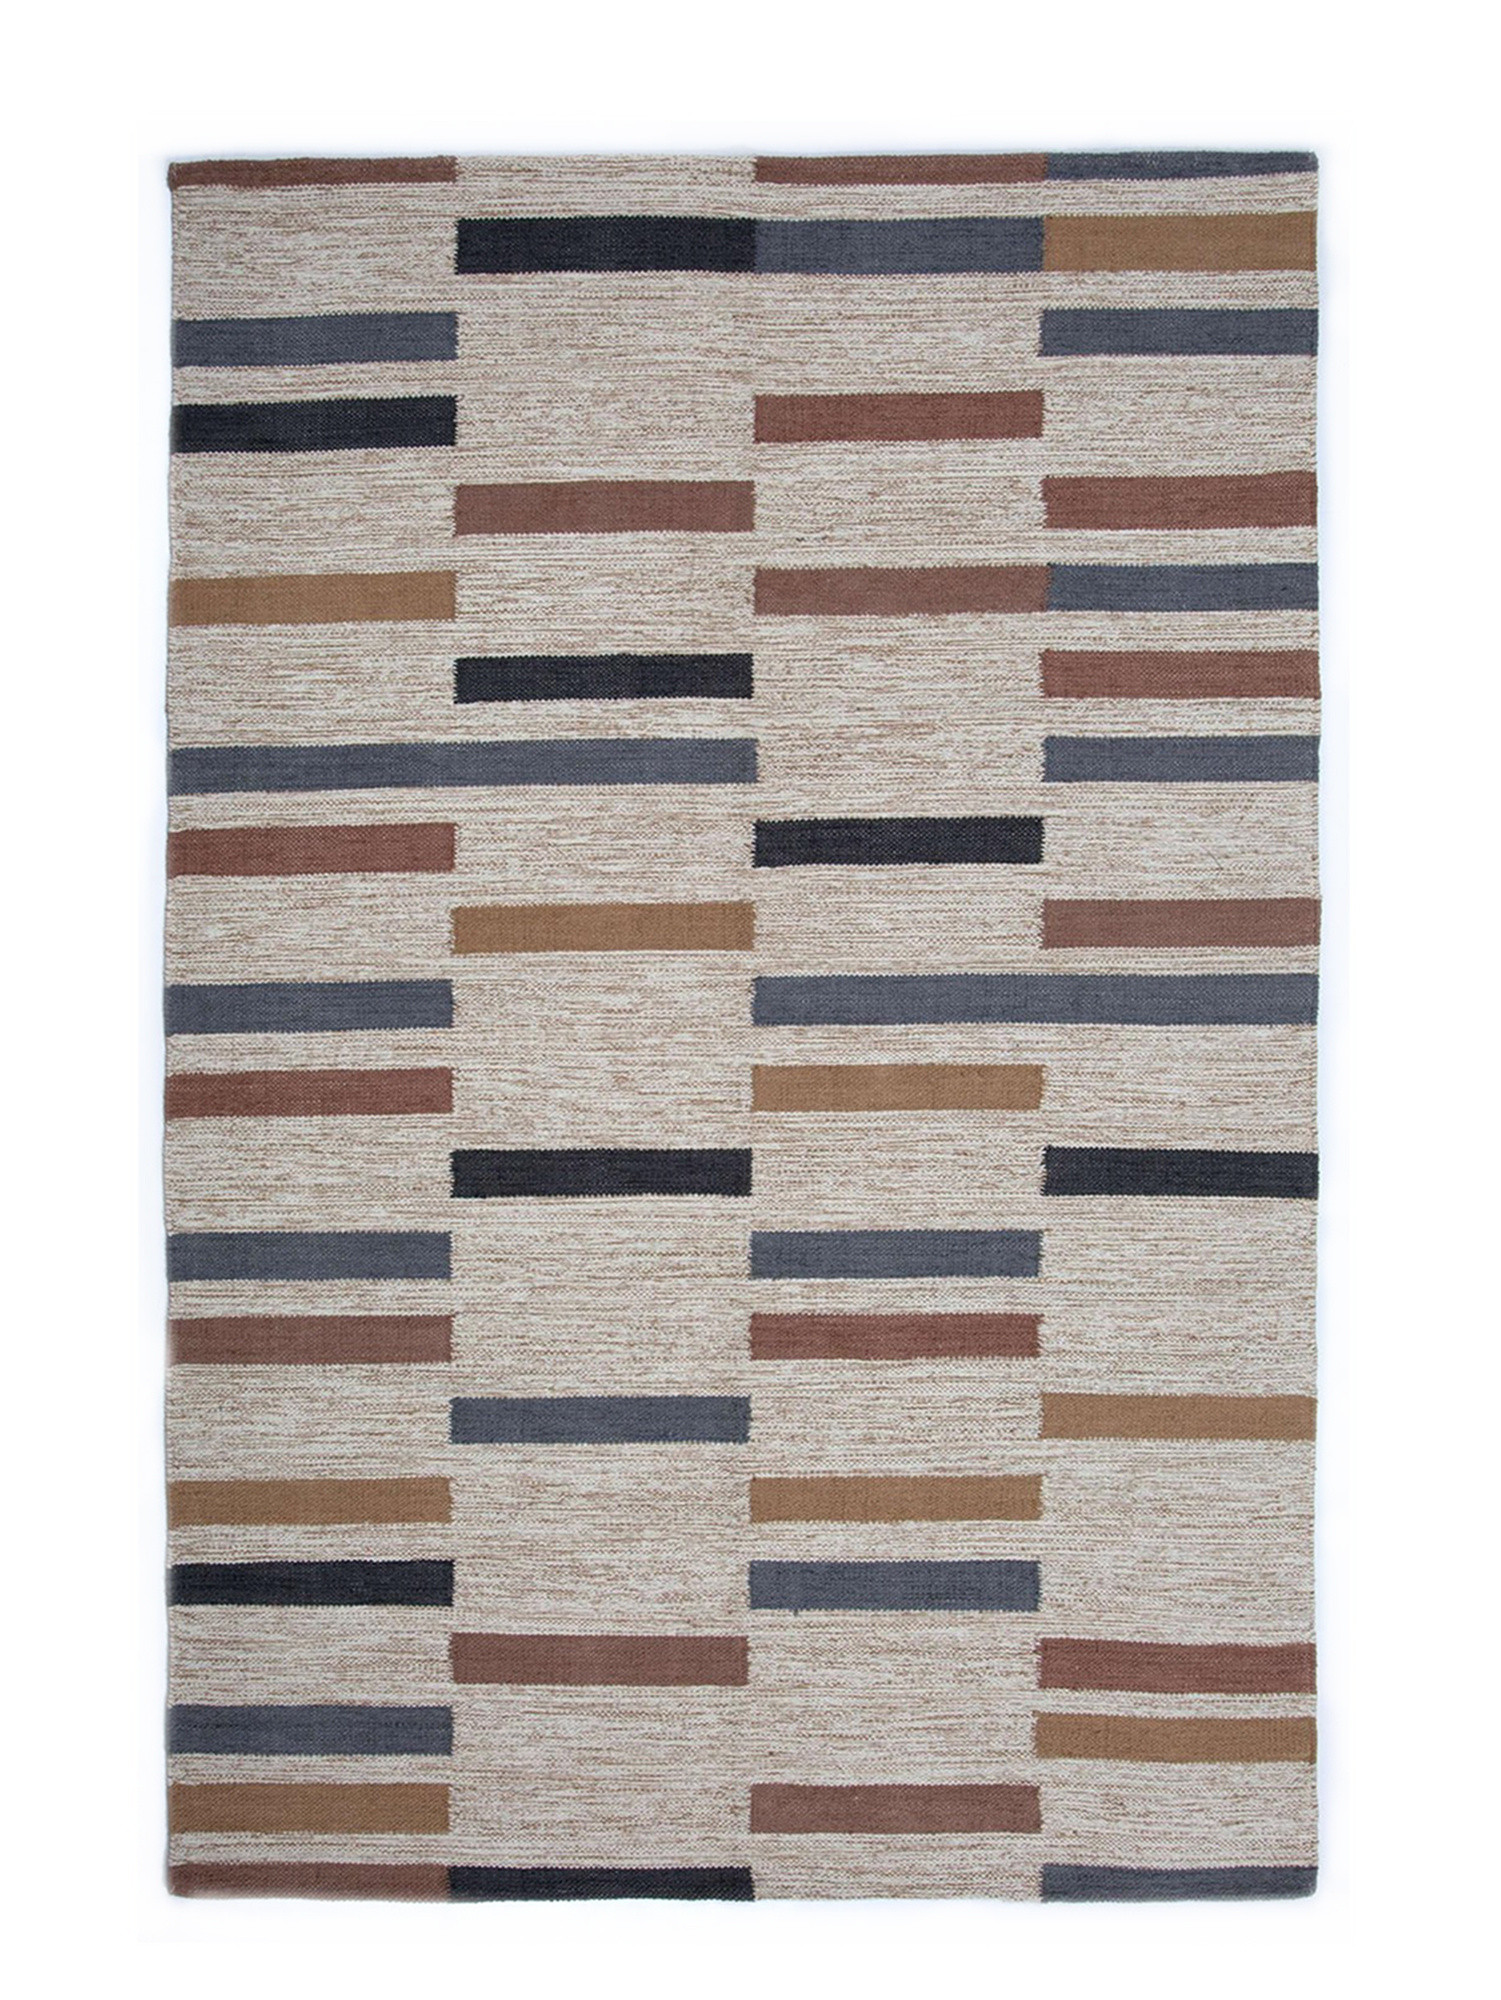 Tappeto cotone disegno multirighe, Beige, large image number 0